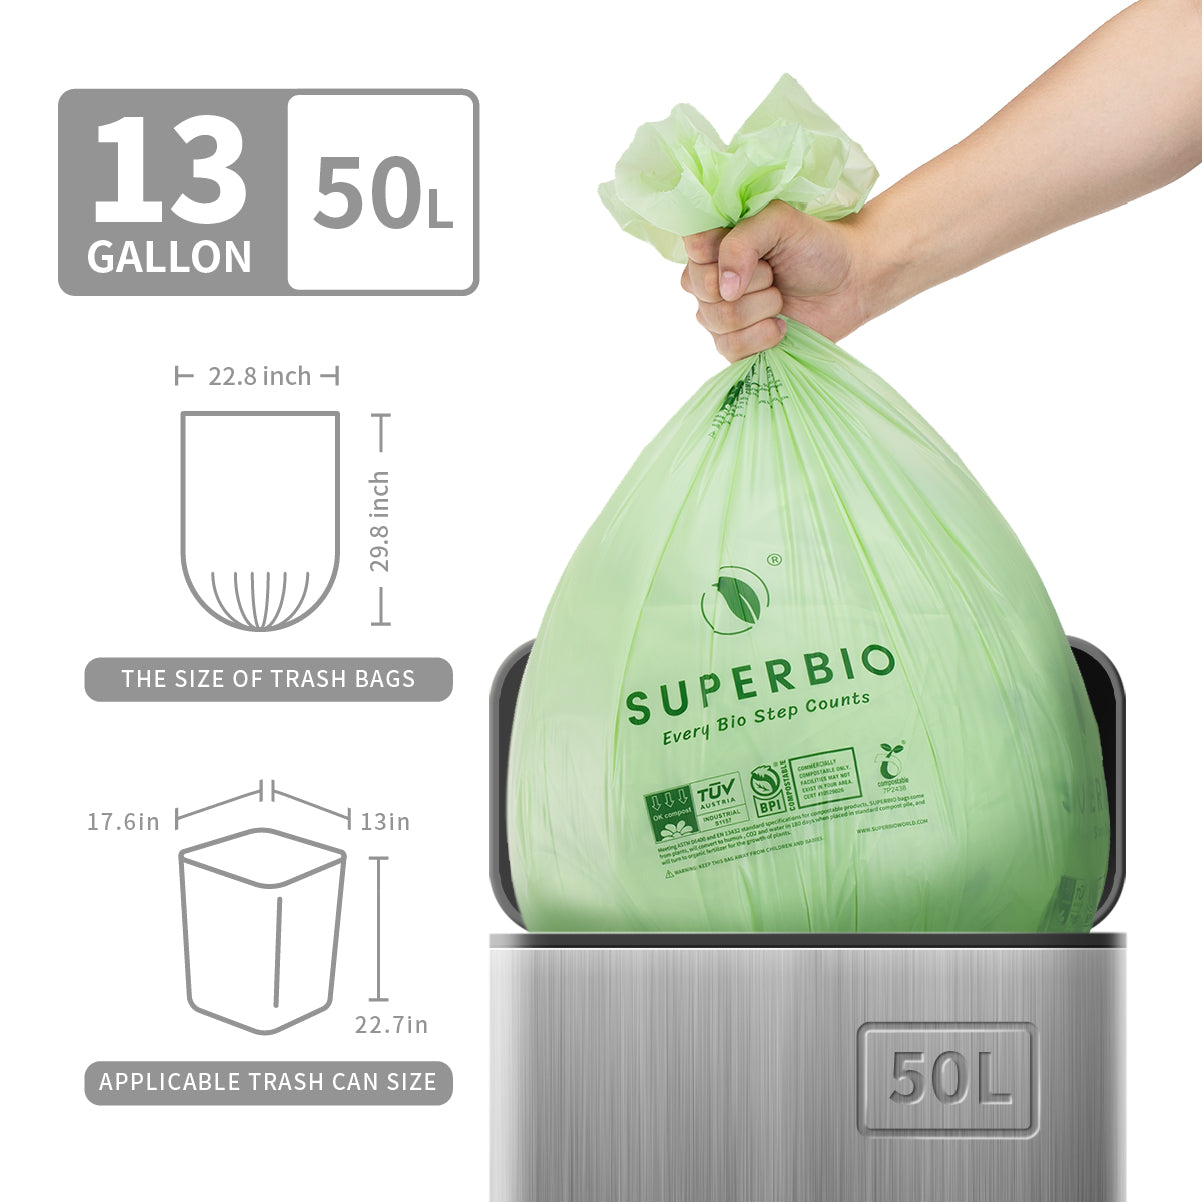 How do compostable T-shirt bags differ from plastic bags?